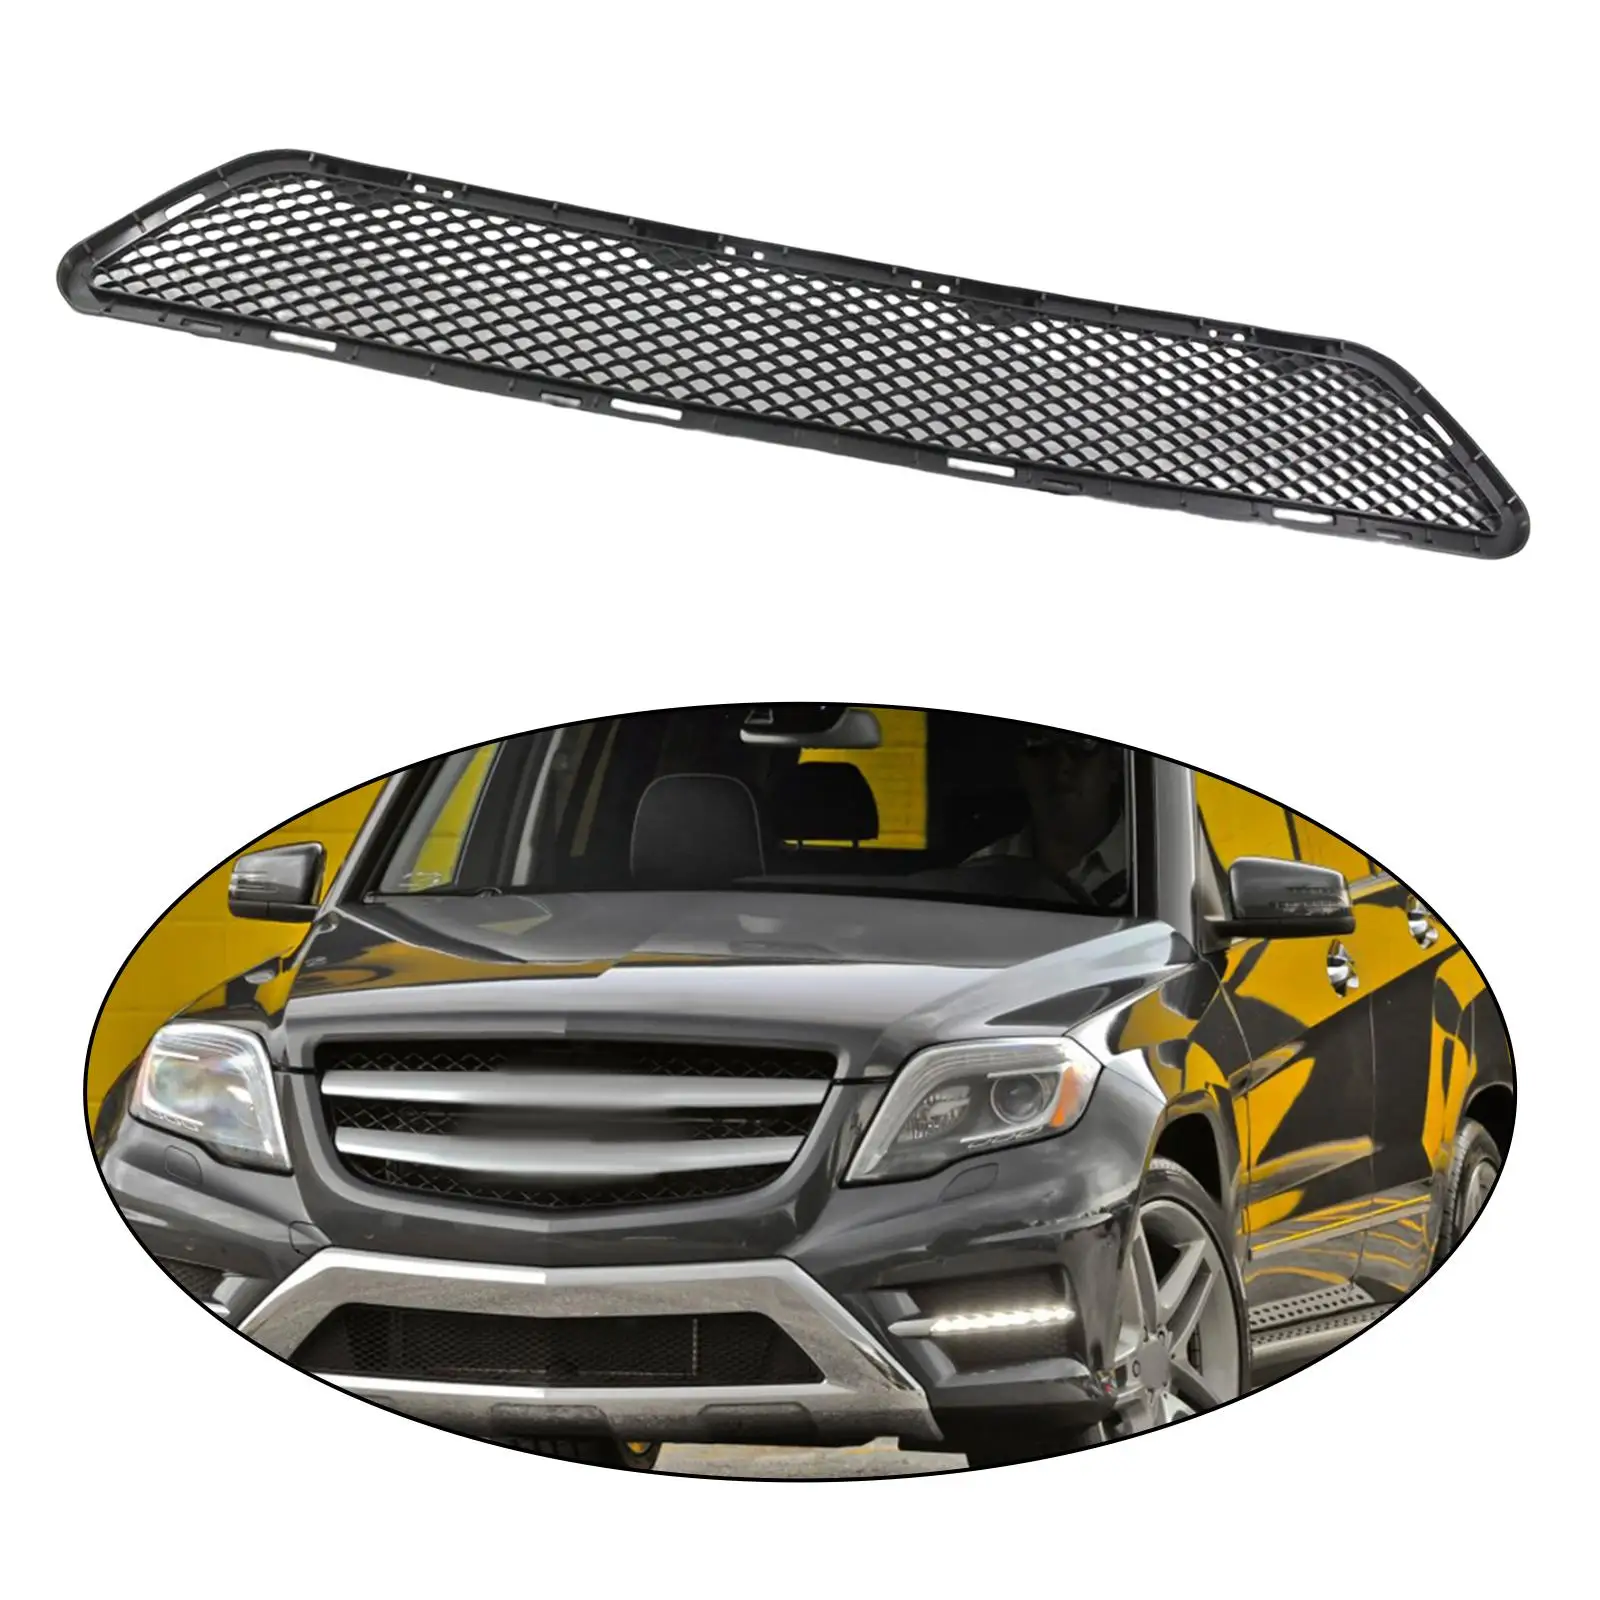 Front bumpers Lower Grill Black Molding Trims Front bumpers Lower Center Grill Cover for x204 Facelift Accessories Replacement